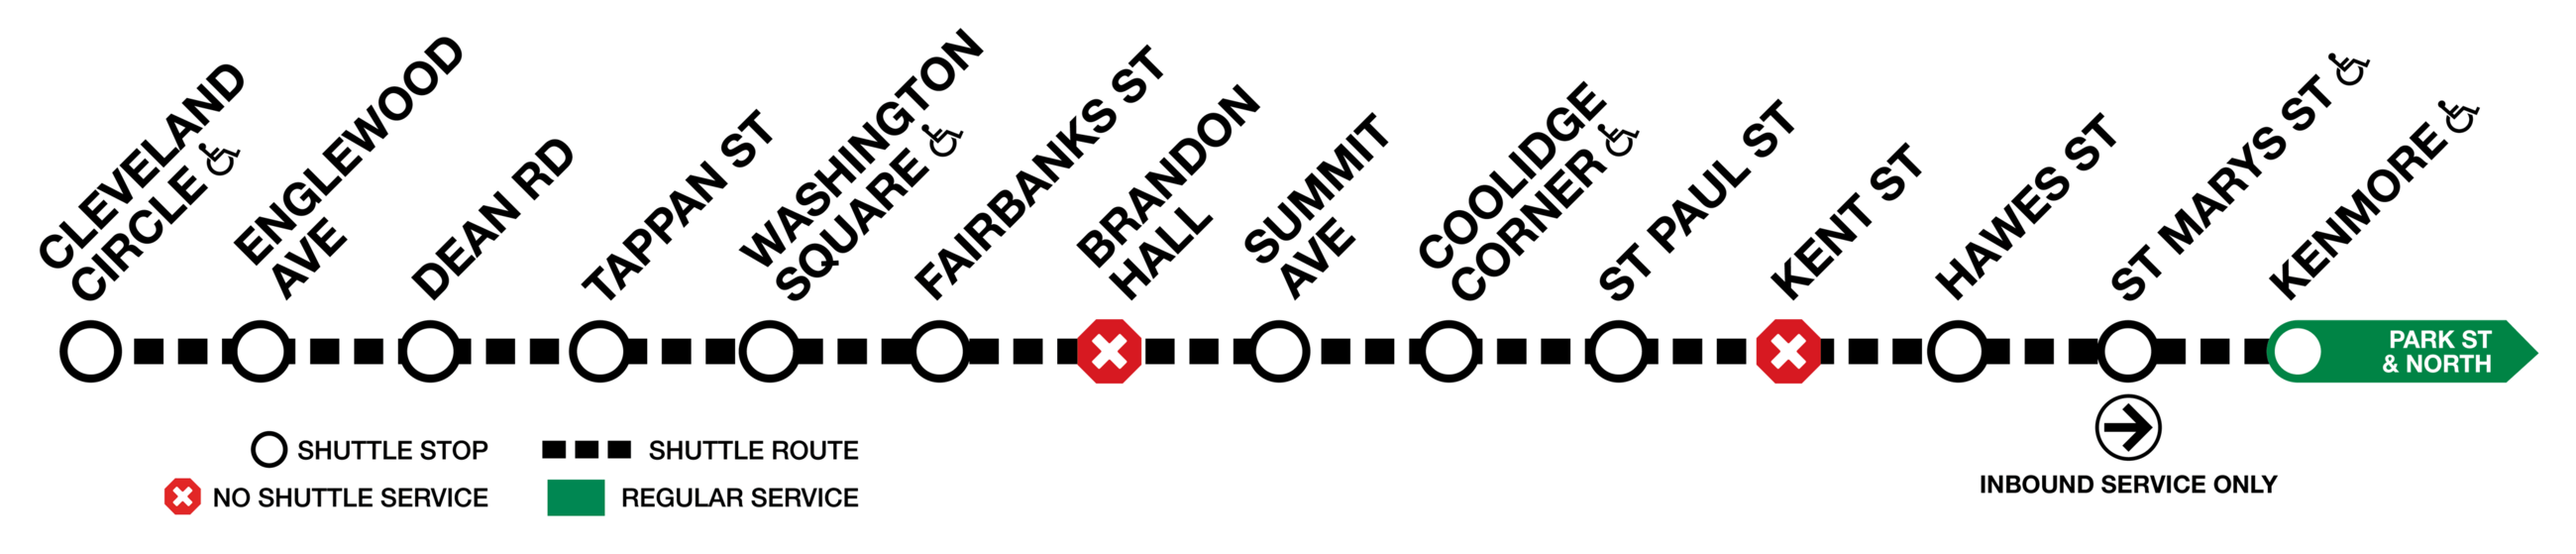 C Branch shuttle route between Kenmore and Cleveland Circle. Shuttles stop at Kenmore, St. Marys street, Hawes street, St. Paul street, Coolidge Corner, Summit Avenue, Fairbanks street, Washington square, Tappan street, Dean road, Englewood avenue, Cleveland Circle. Stops with no shuttle service include Kent street and Brandon Hall